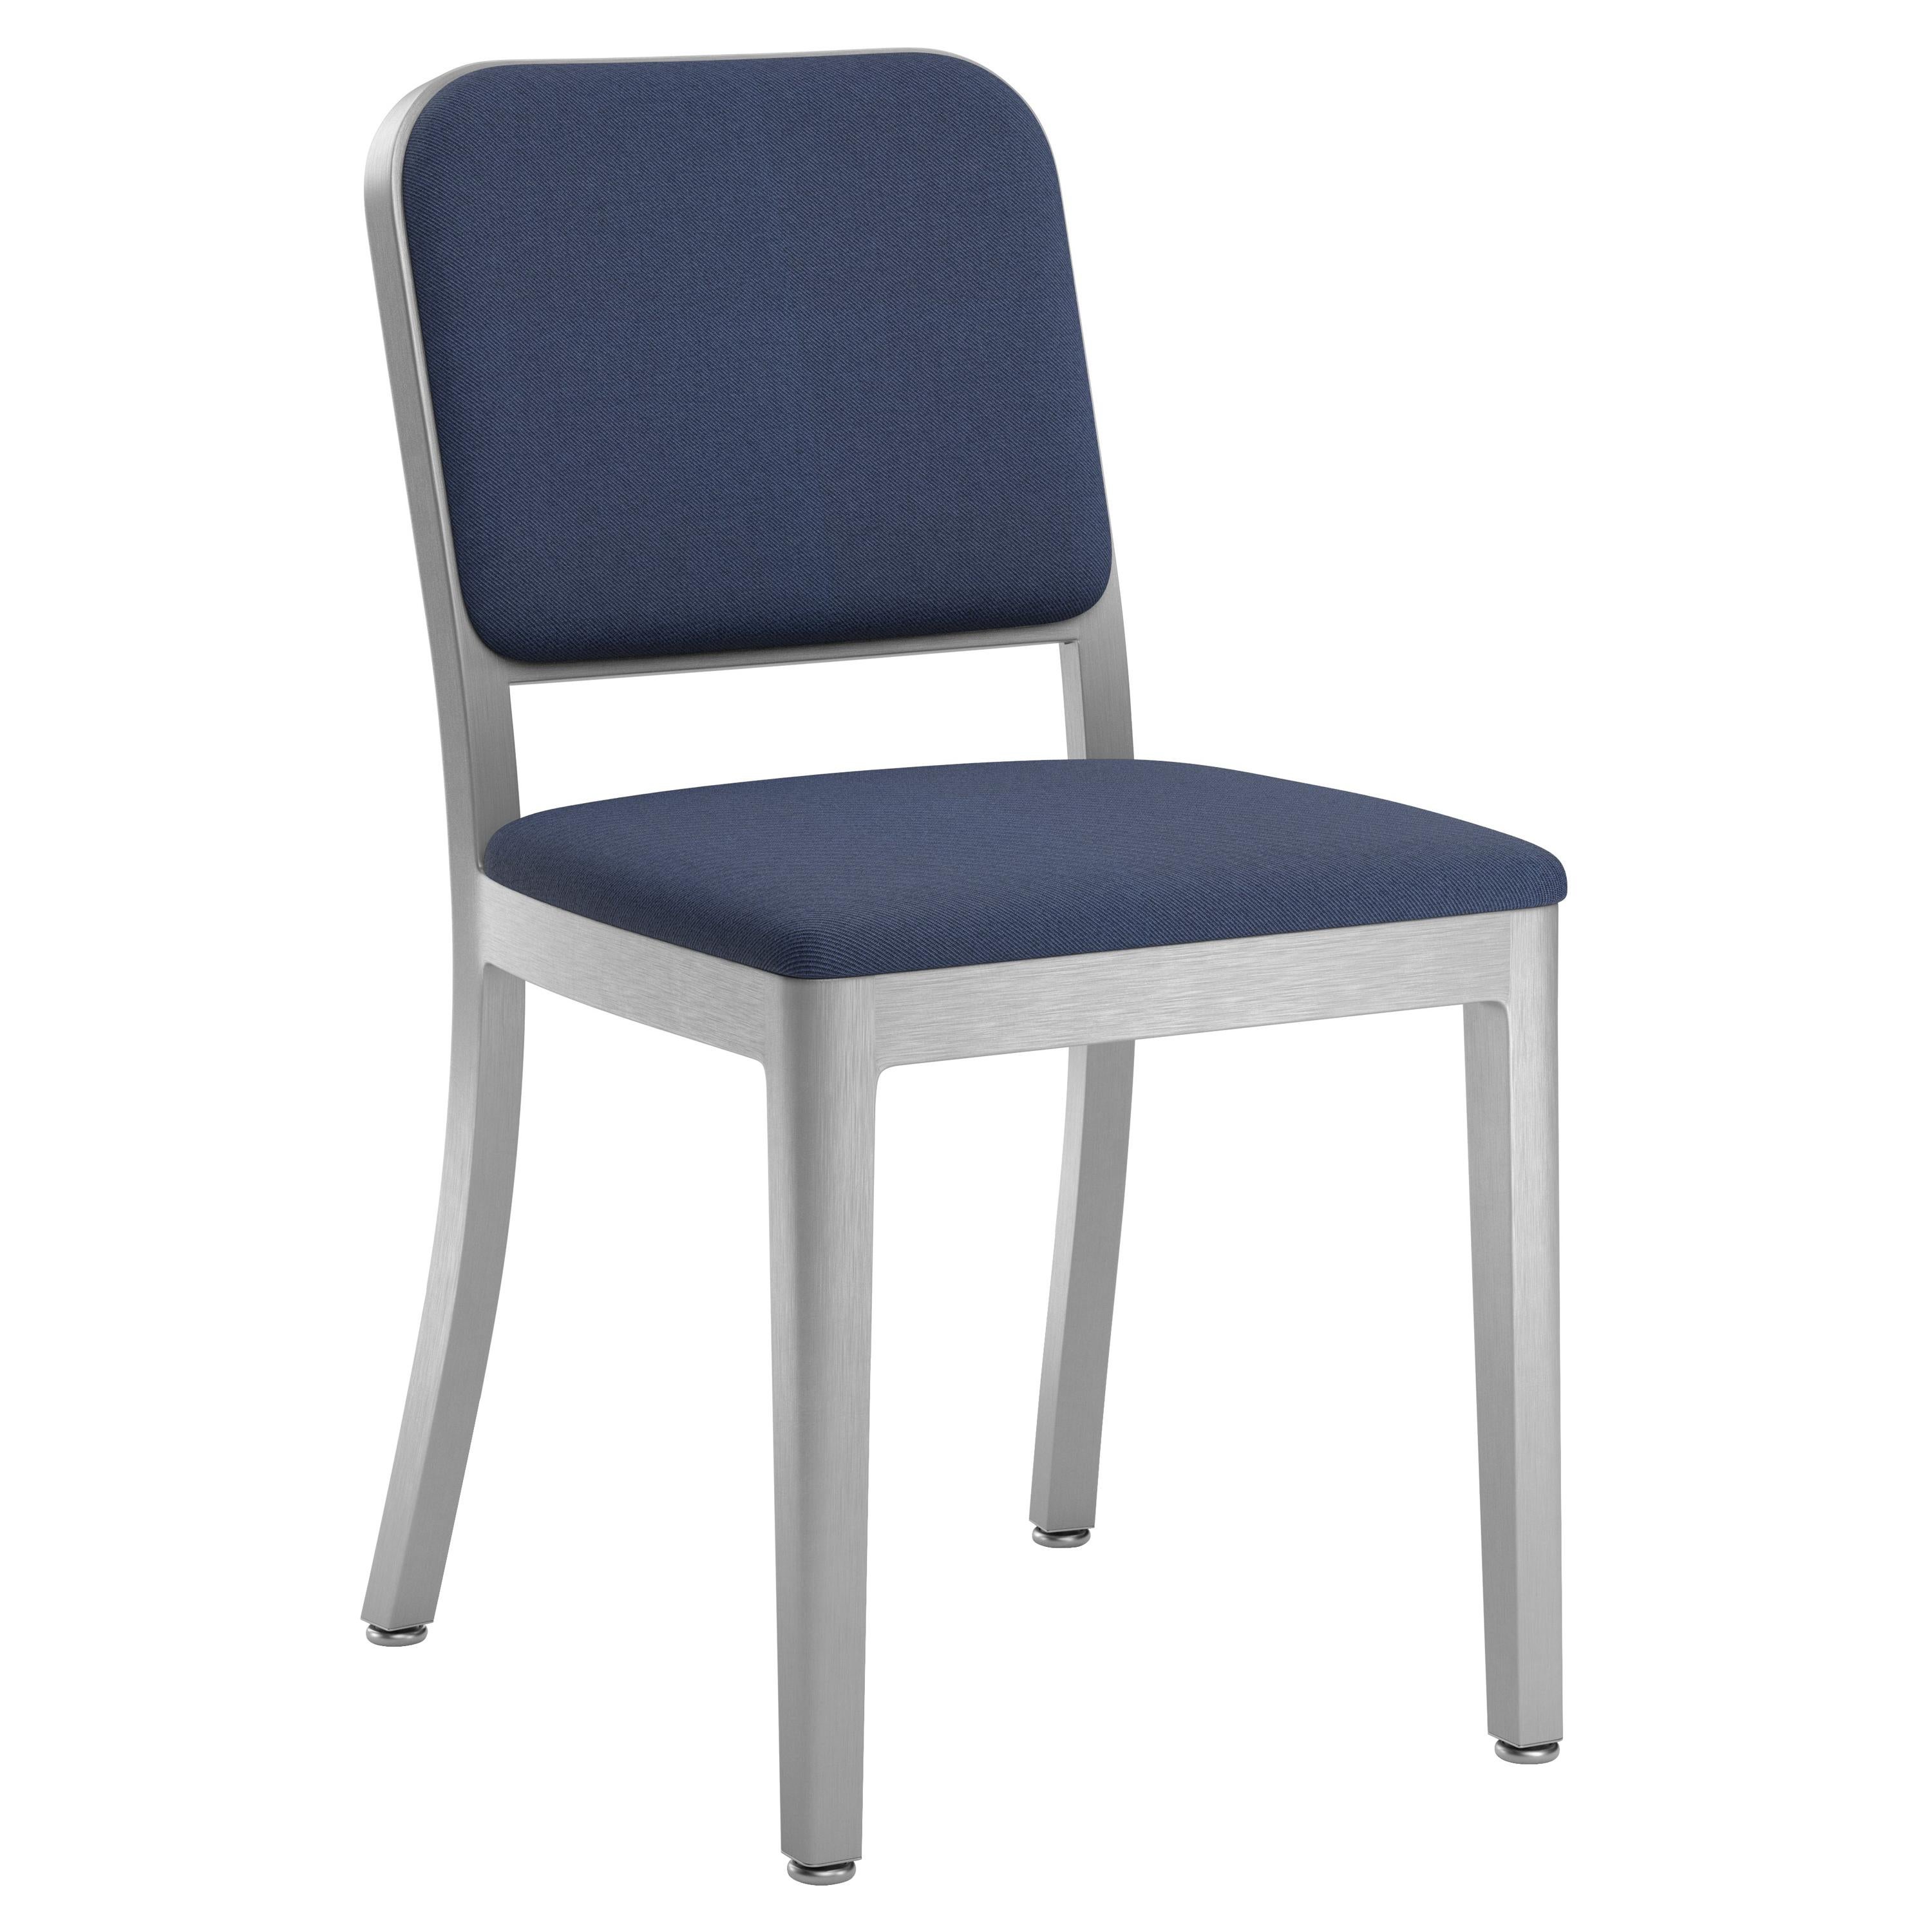 Emeco Navy Officer Side Chair in Navy Blue Fabric with Aluminum Frame For Sale